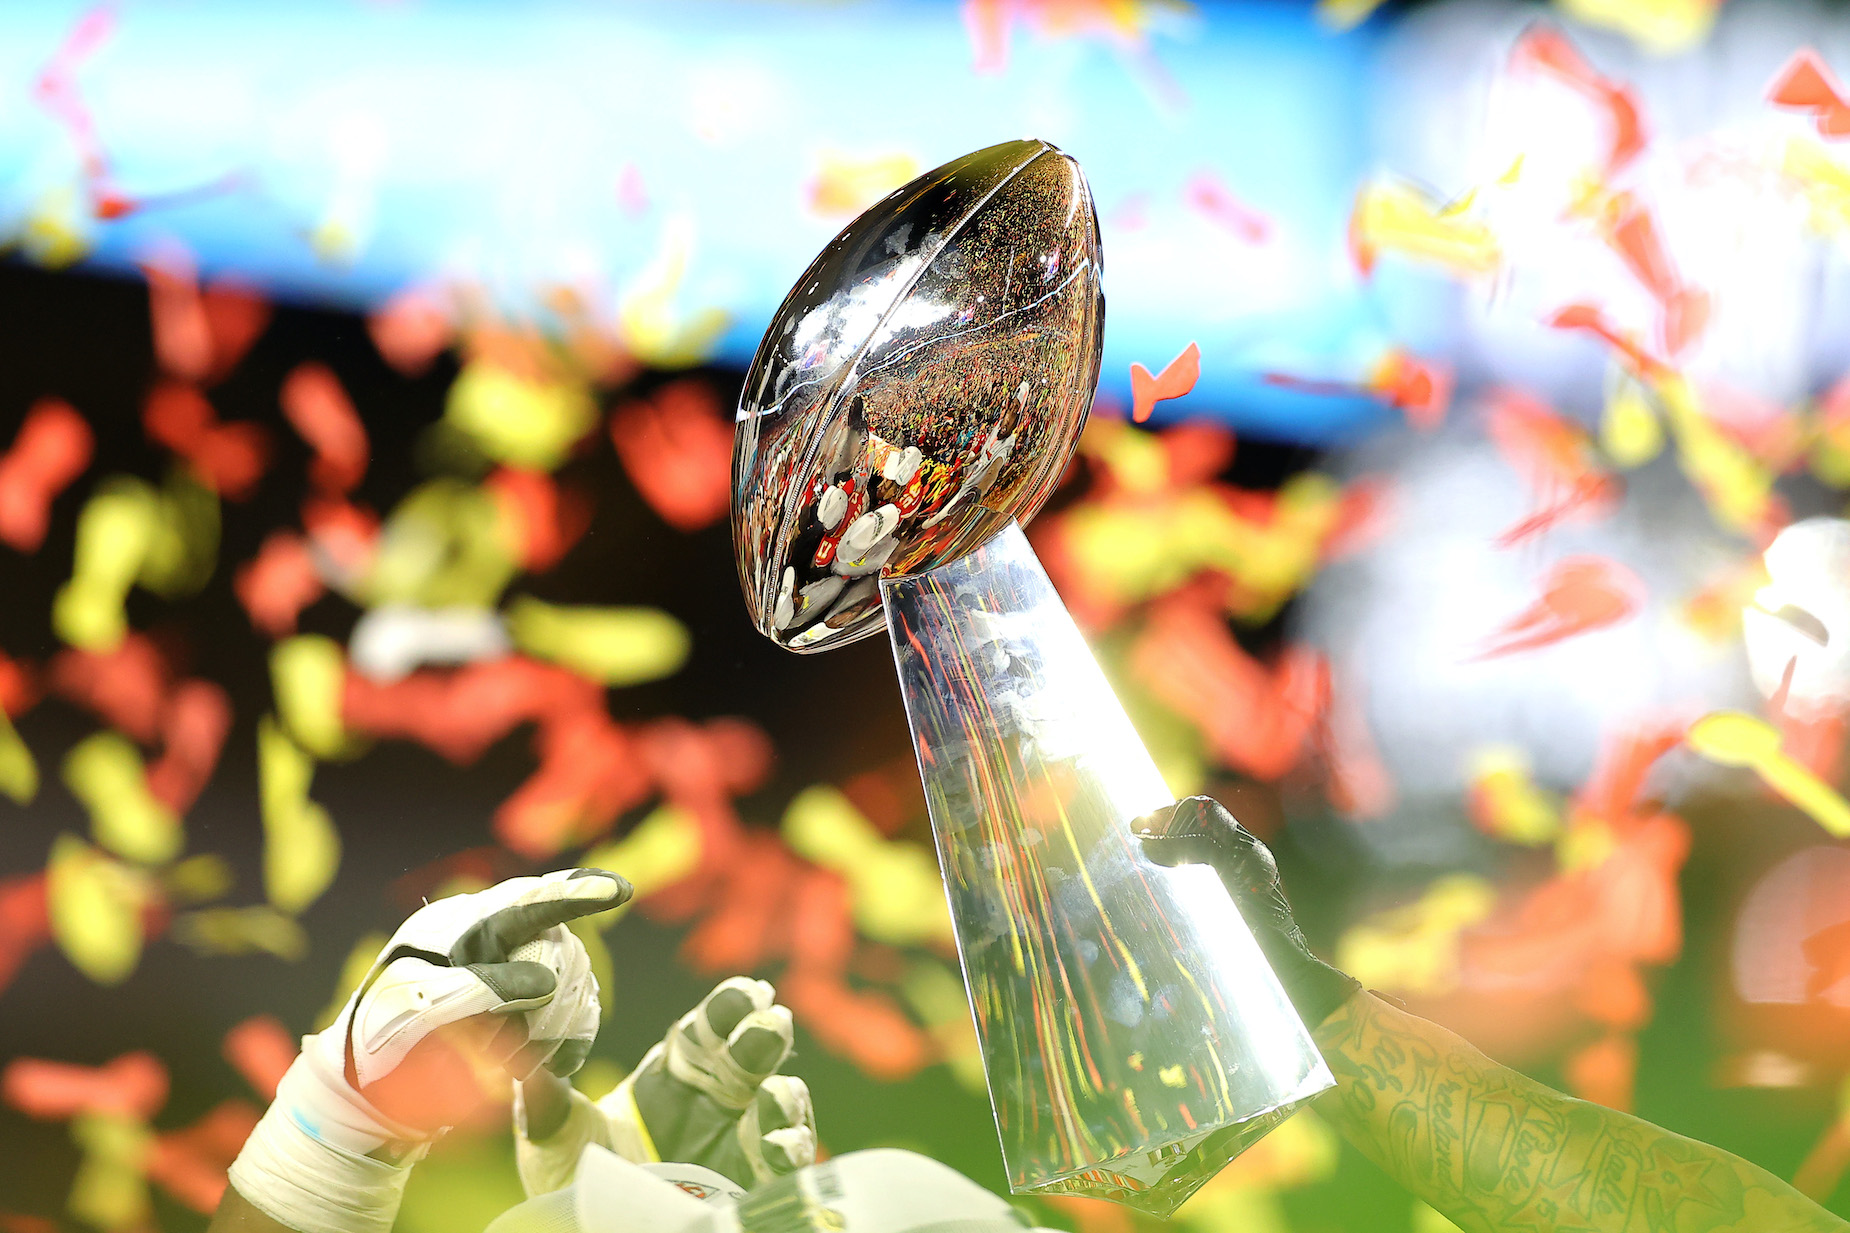 Can the Kansas City Chiefs win back-to-back Super Bowl championships?